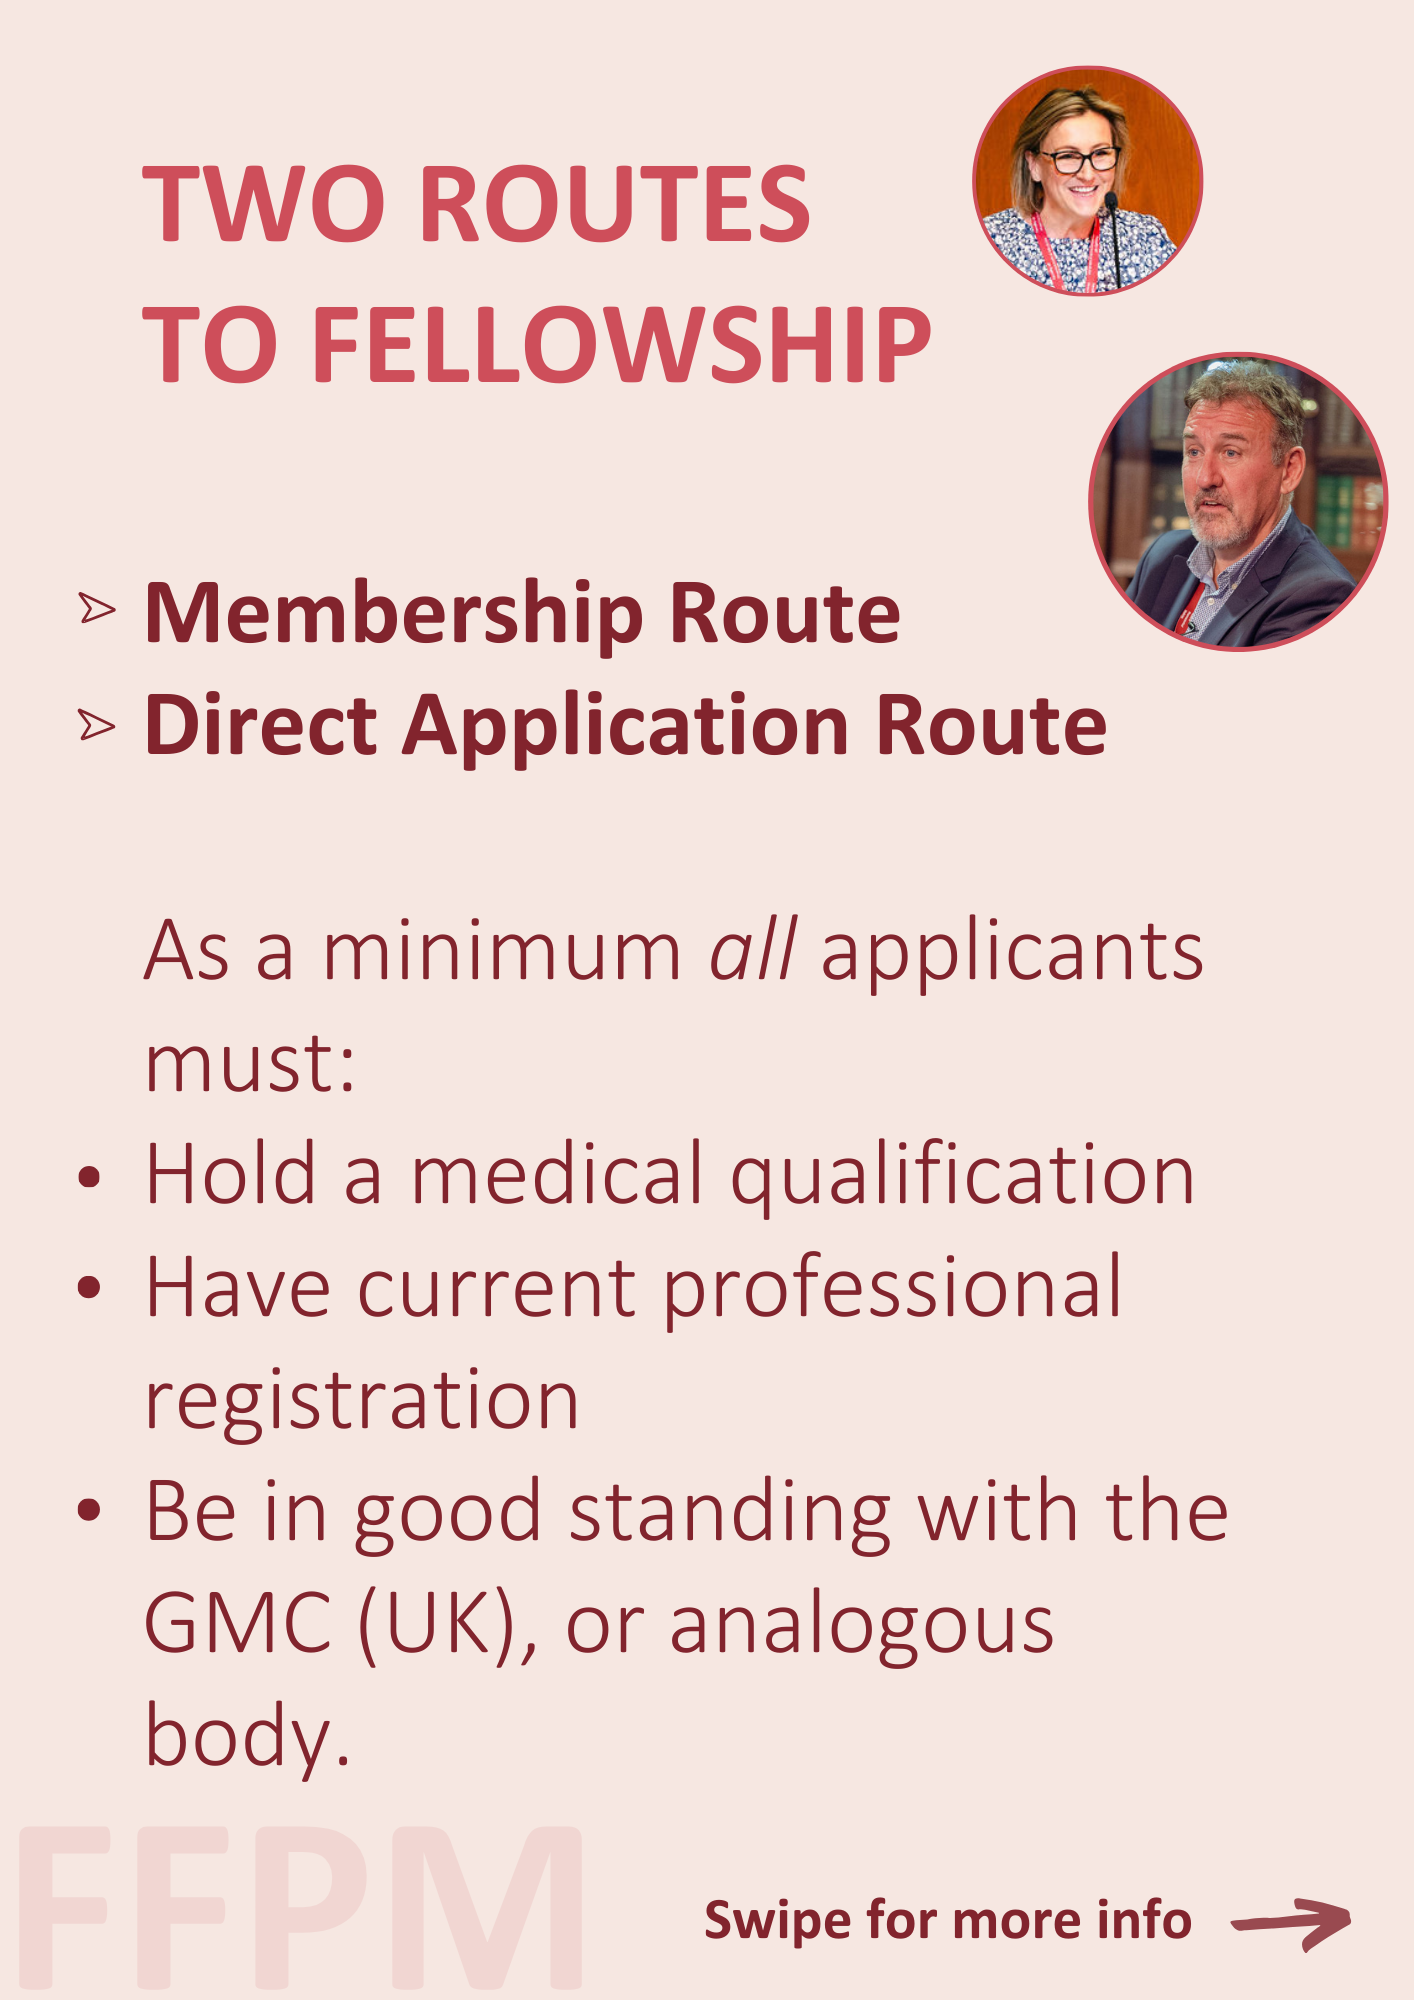 Two Routes to Fellowship Membership Route Direct Application Route As a minimum all applicants must: Hold a medical qualification Have current professional registration Be in good standing with the GMC (UK), or analogous body.